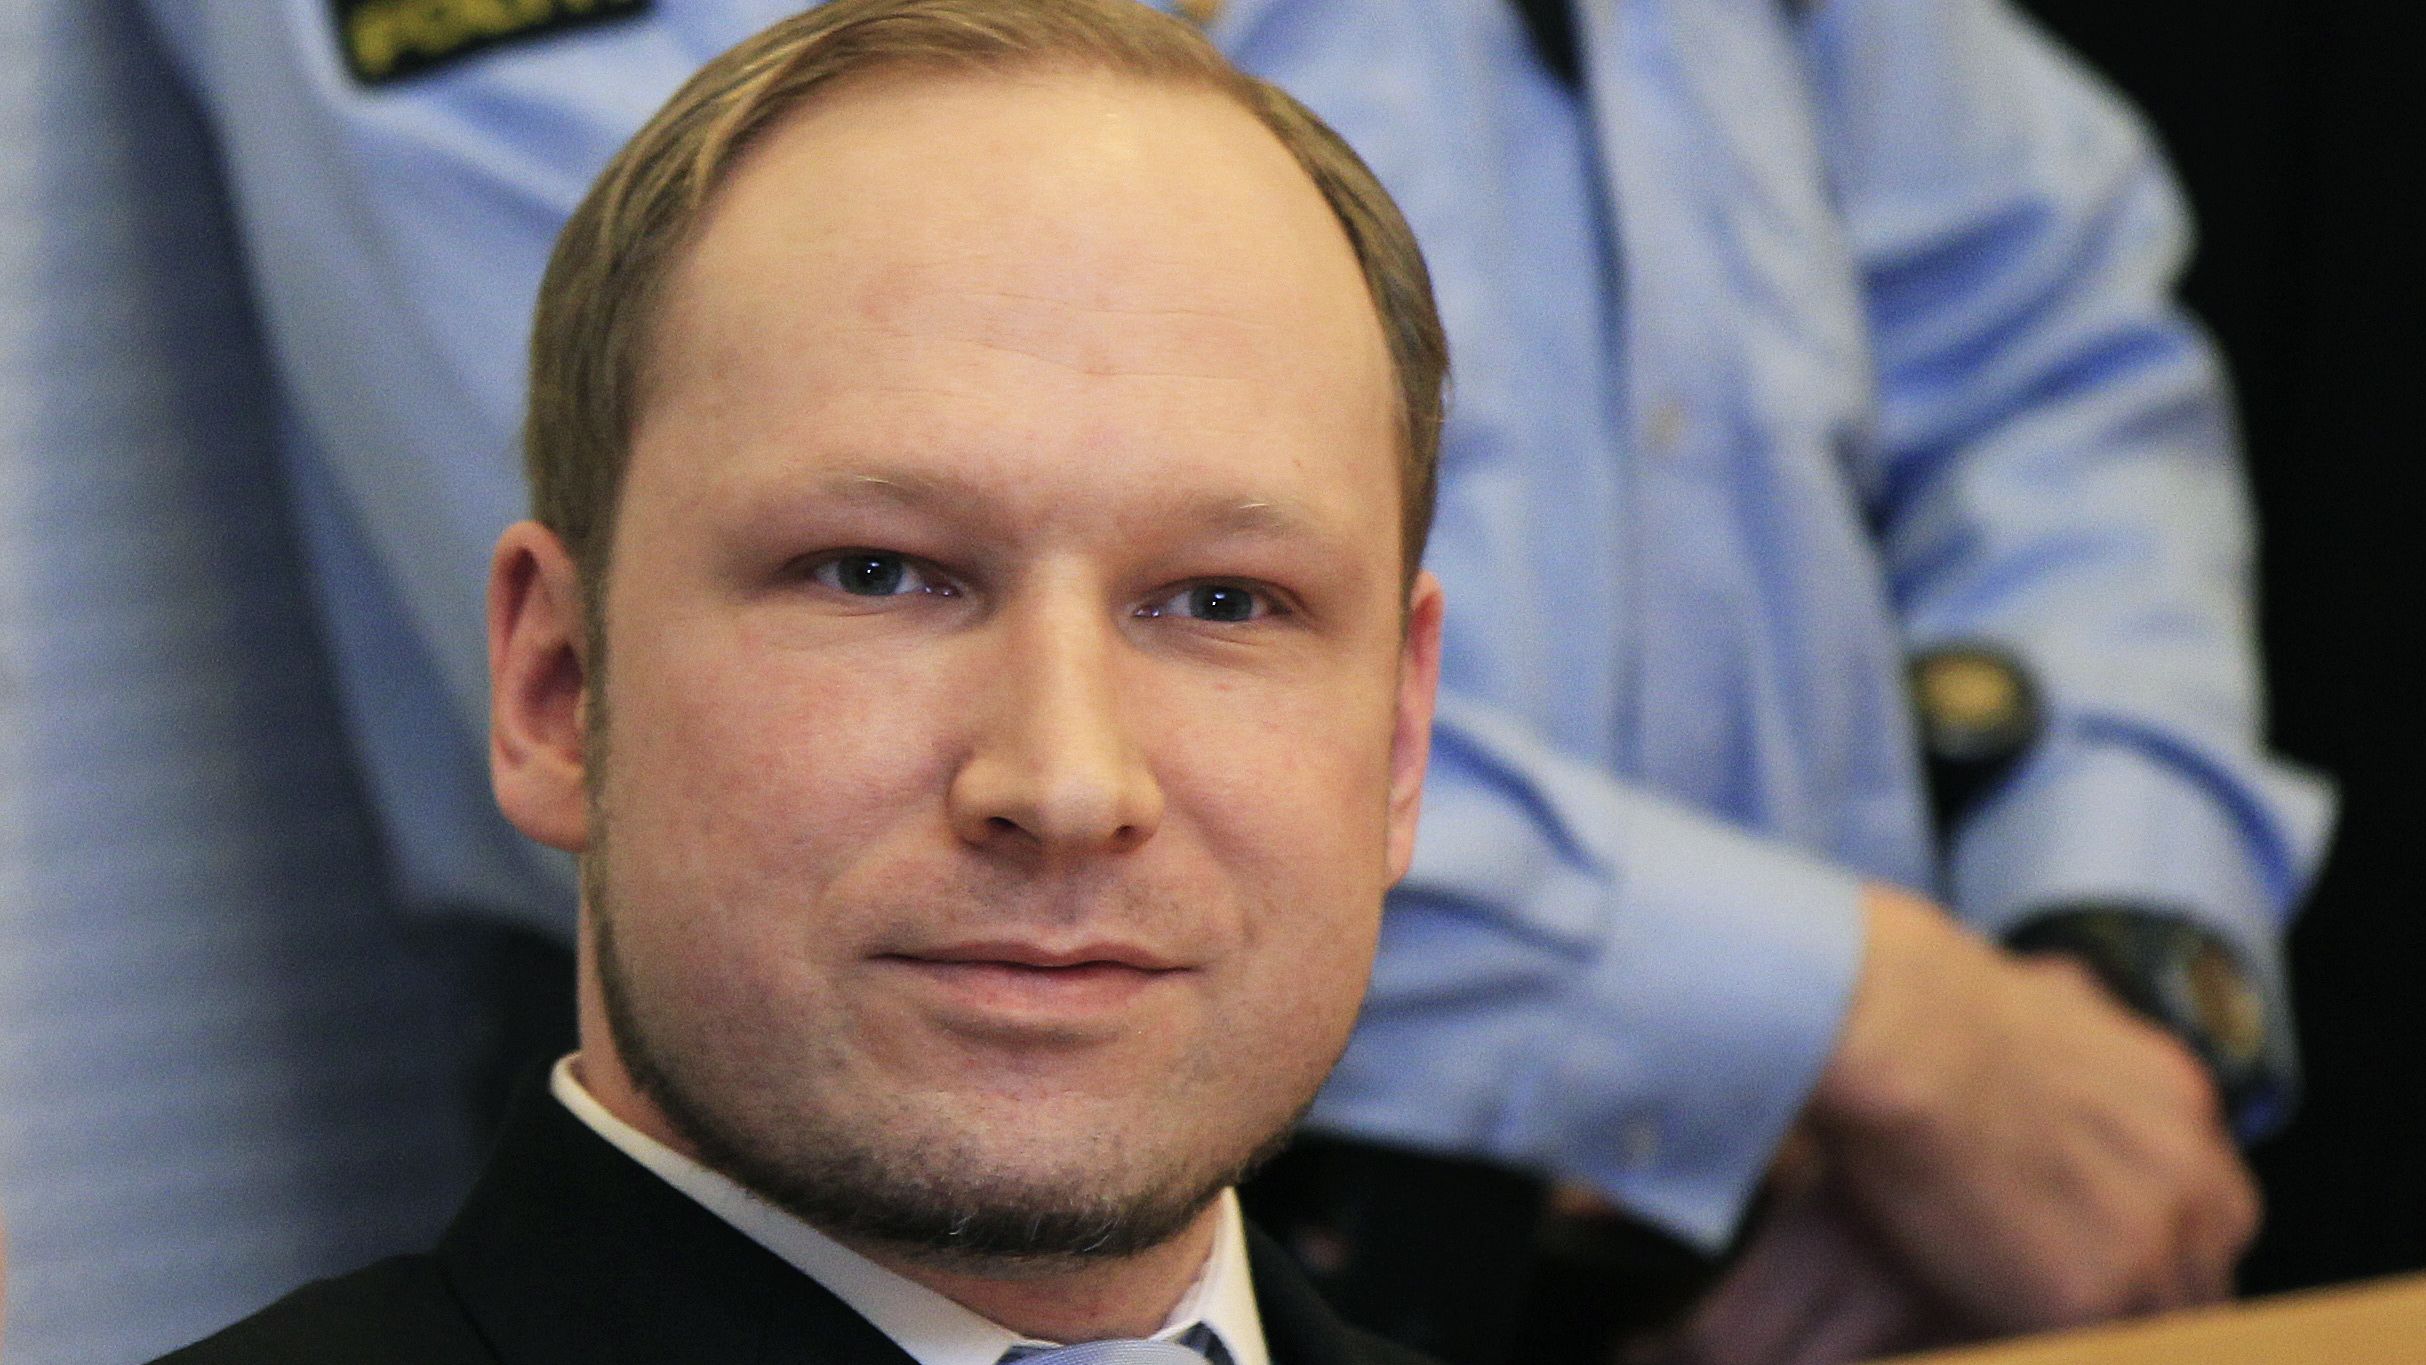  Anders Behring Breivik pictured in court in Oslo in February.